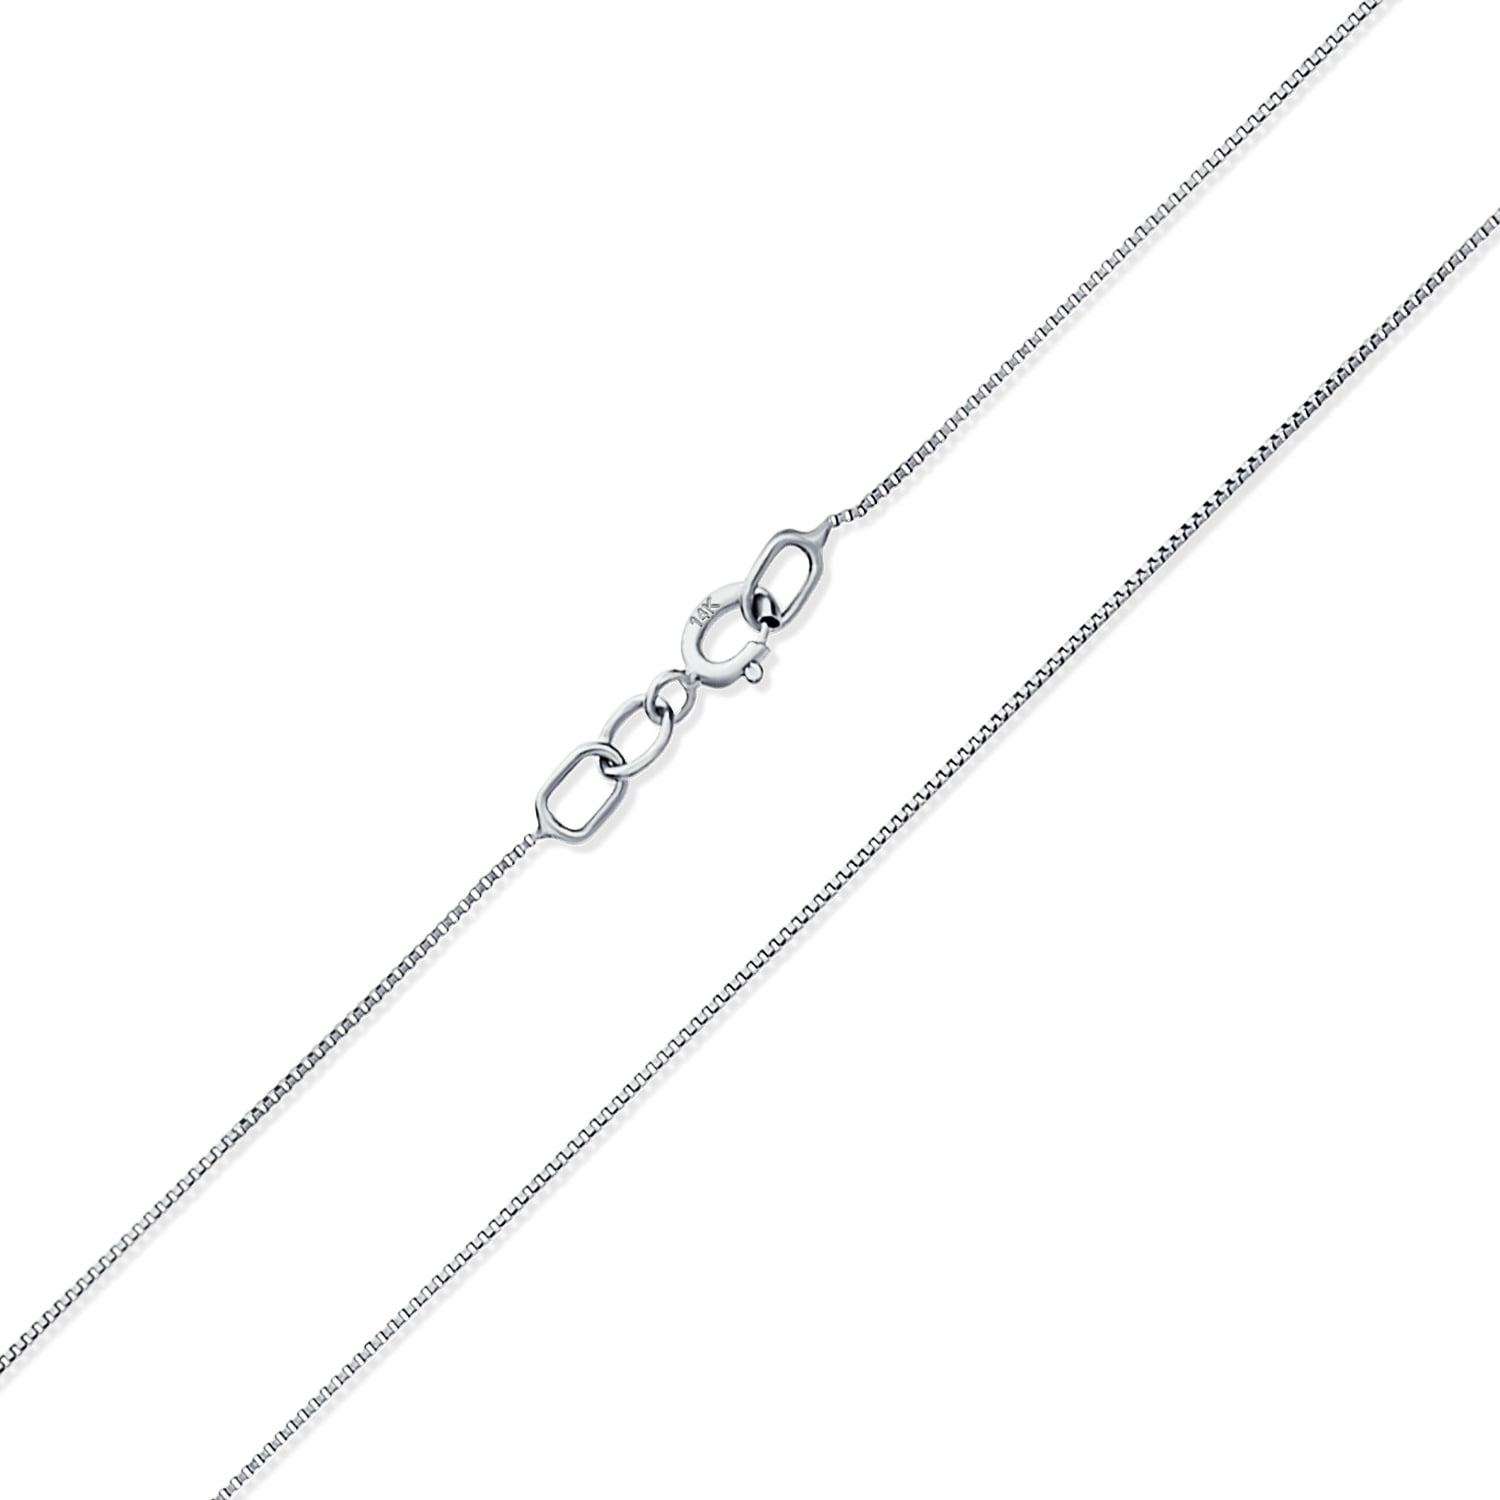 Available Length 16 to 24 Double Accent 14K White Gold 0.7mm 030 Gauge Franco Chain Necklace 